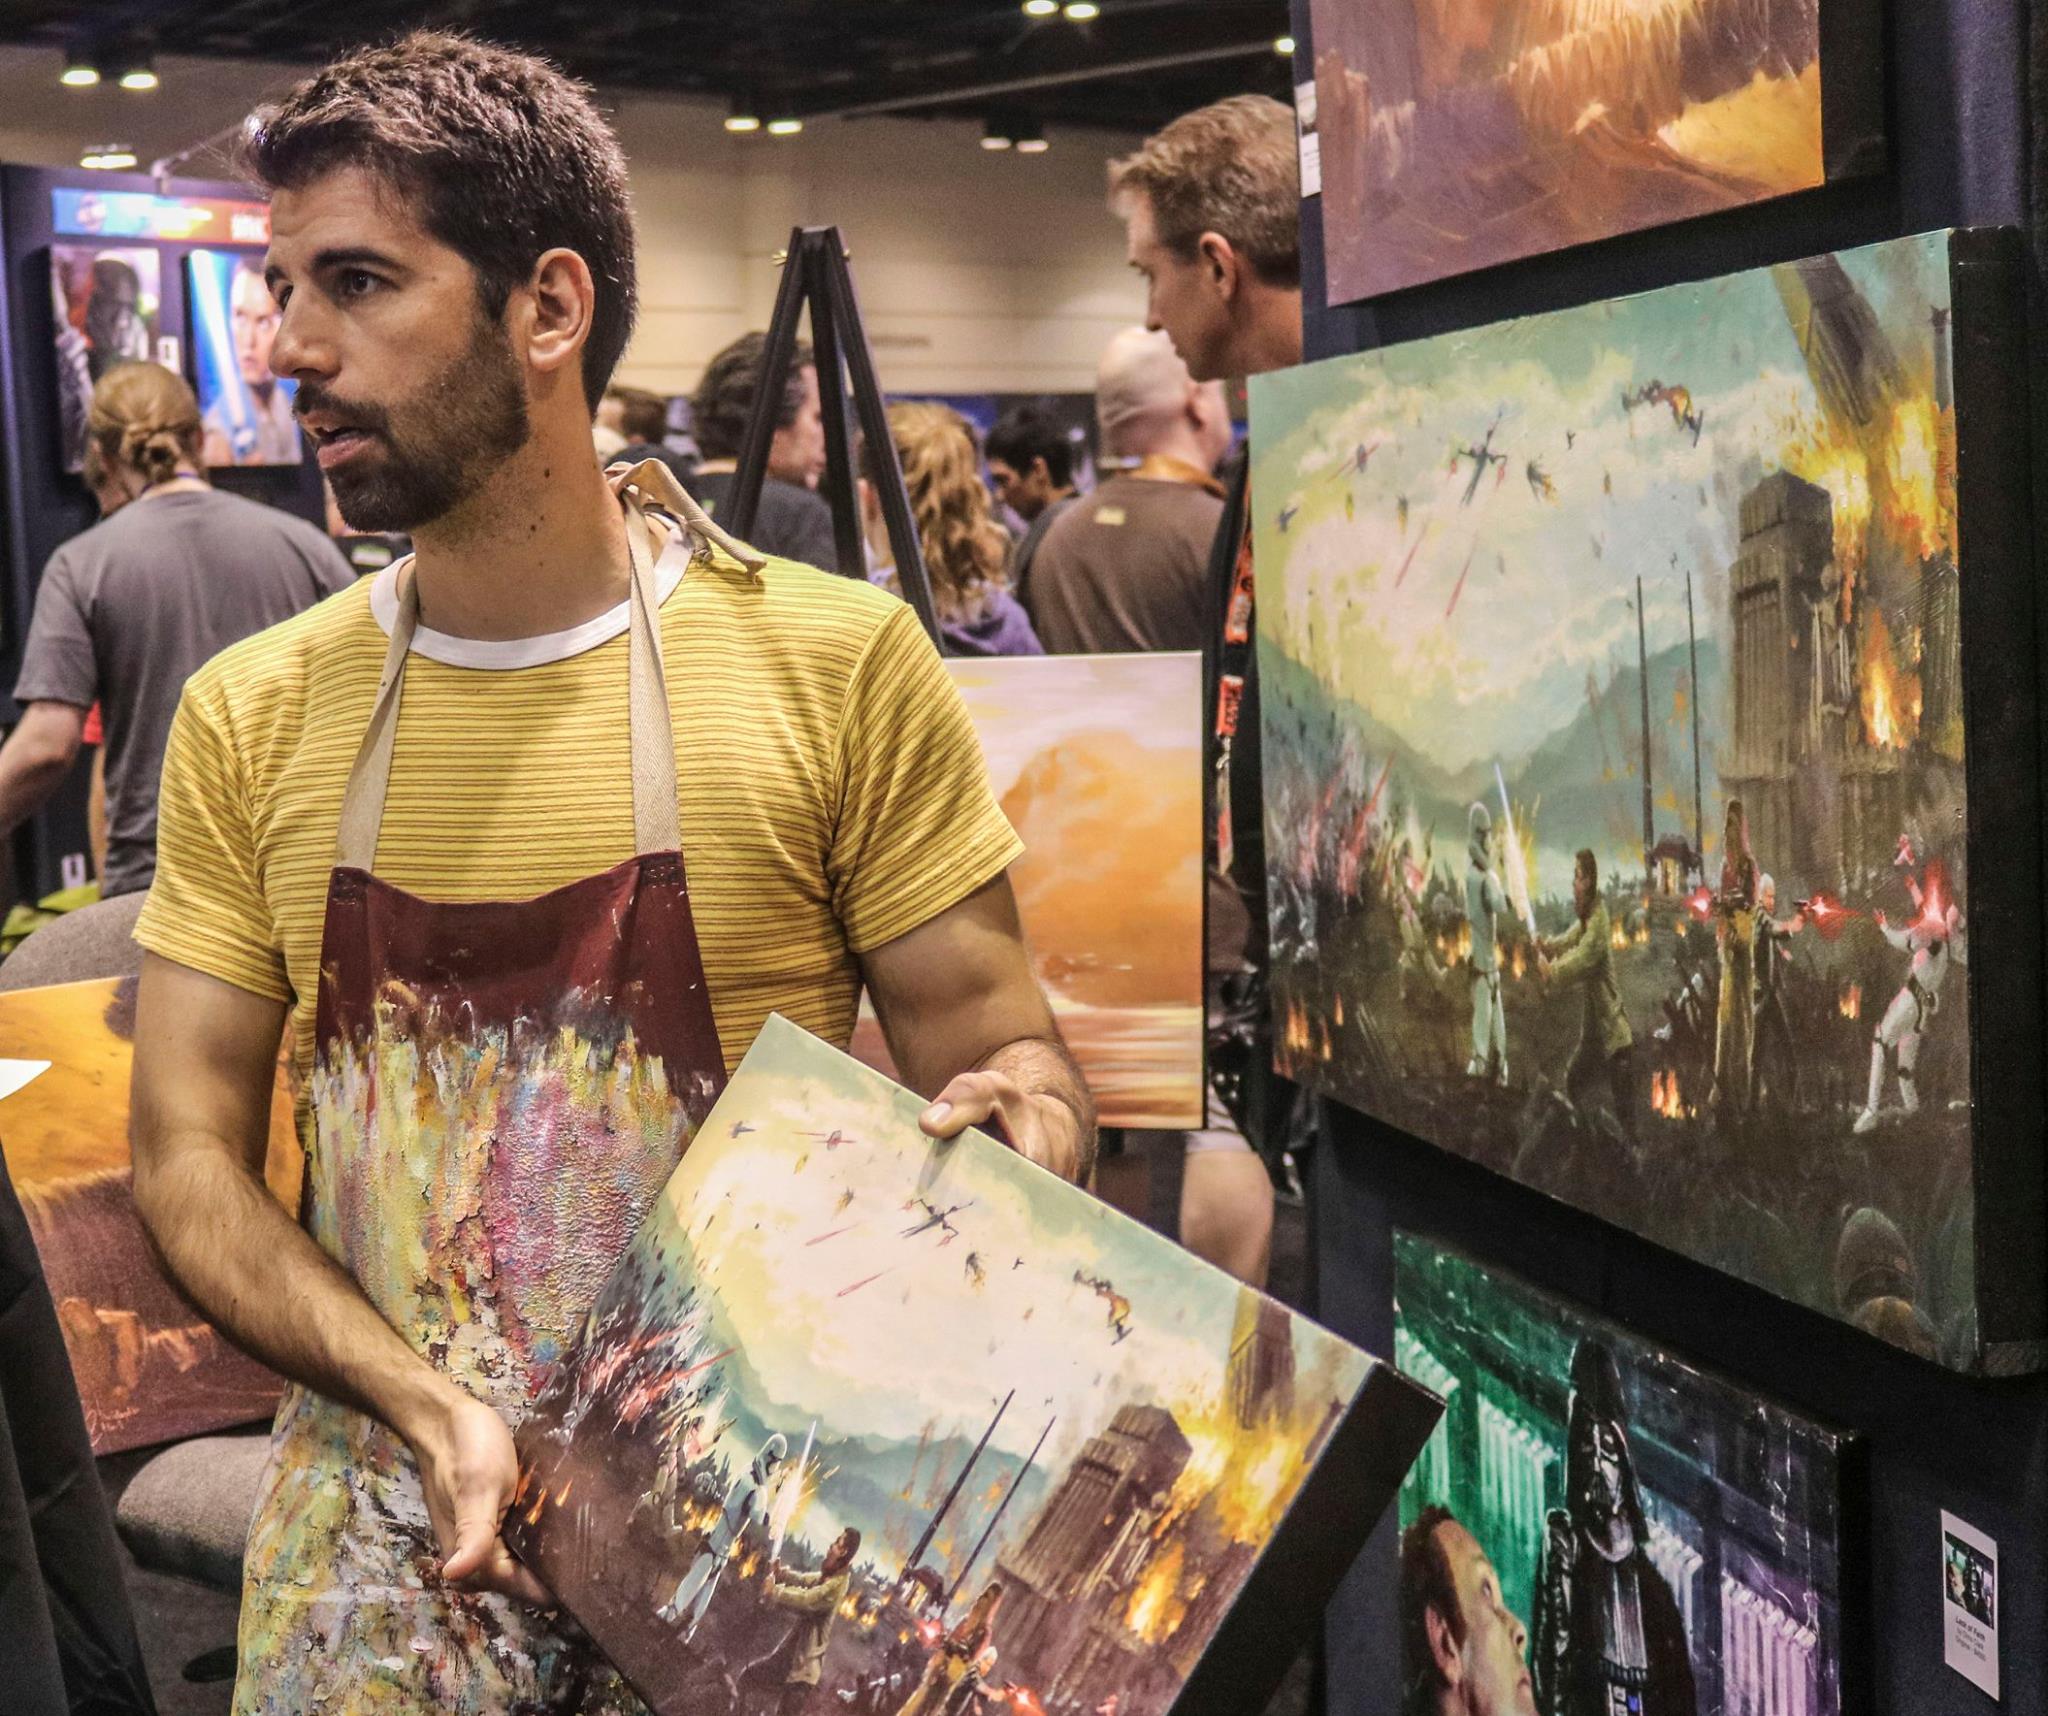 A look at some of the featured art work and artists at Star Wars Celebration Orlando